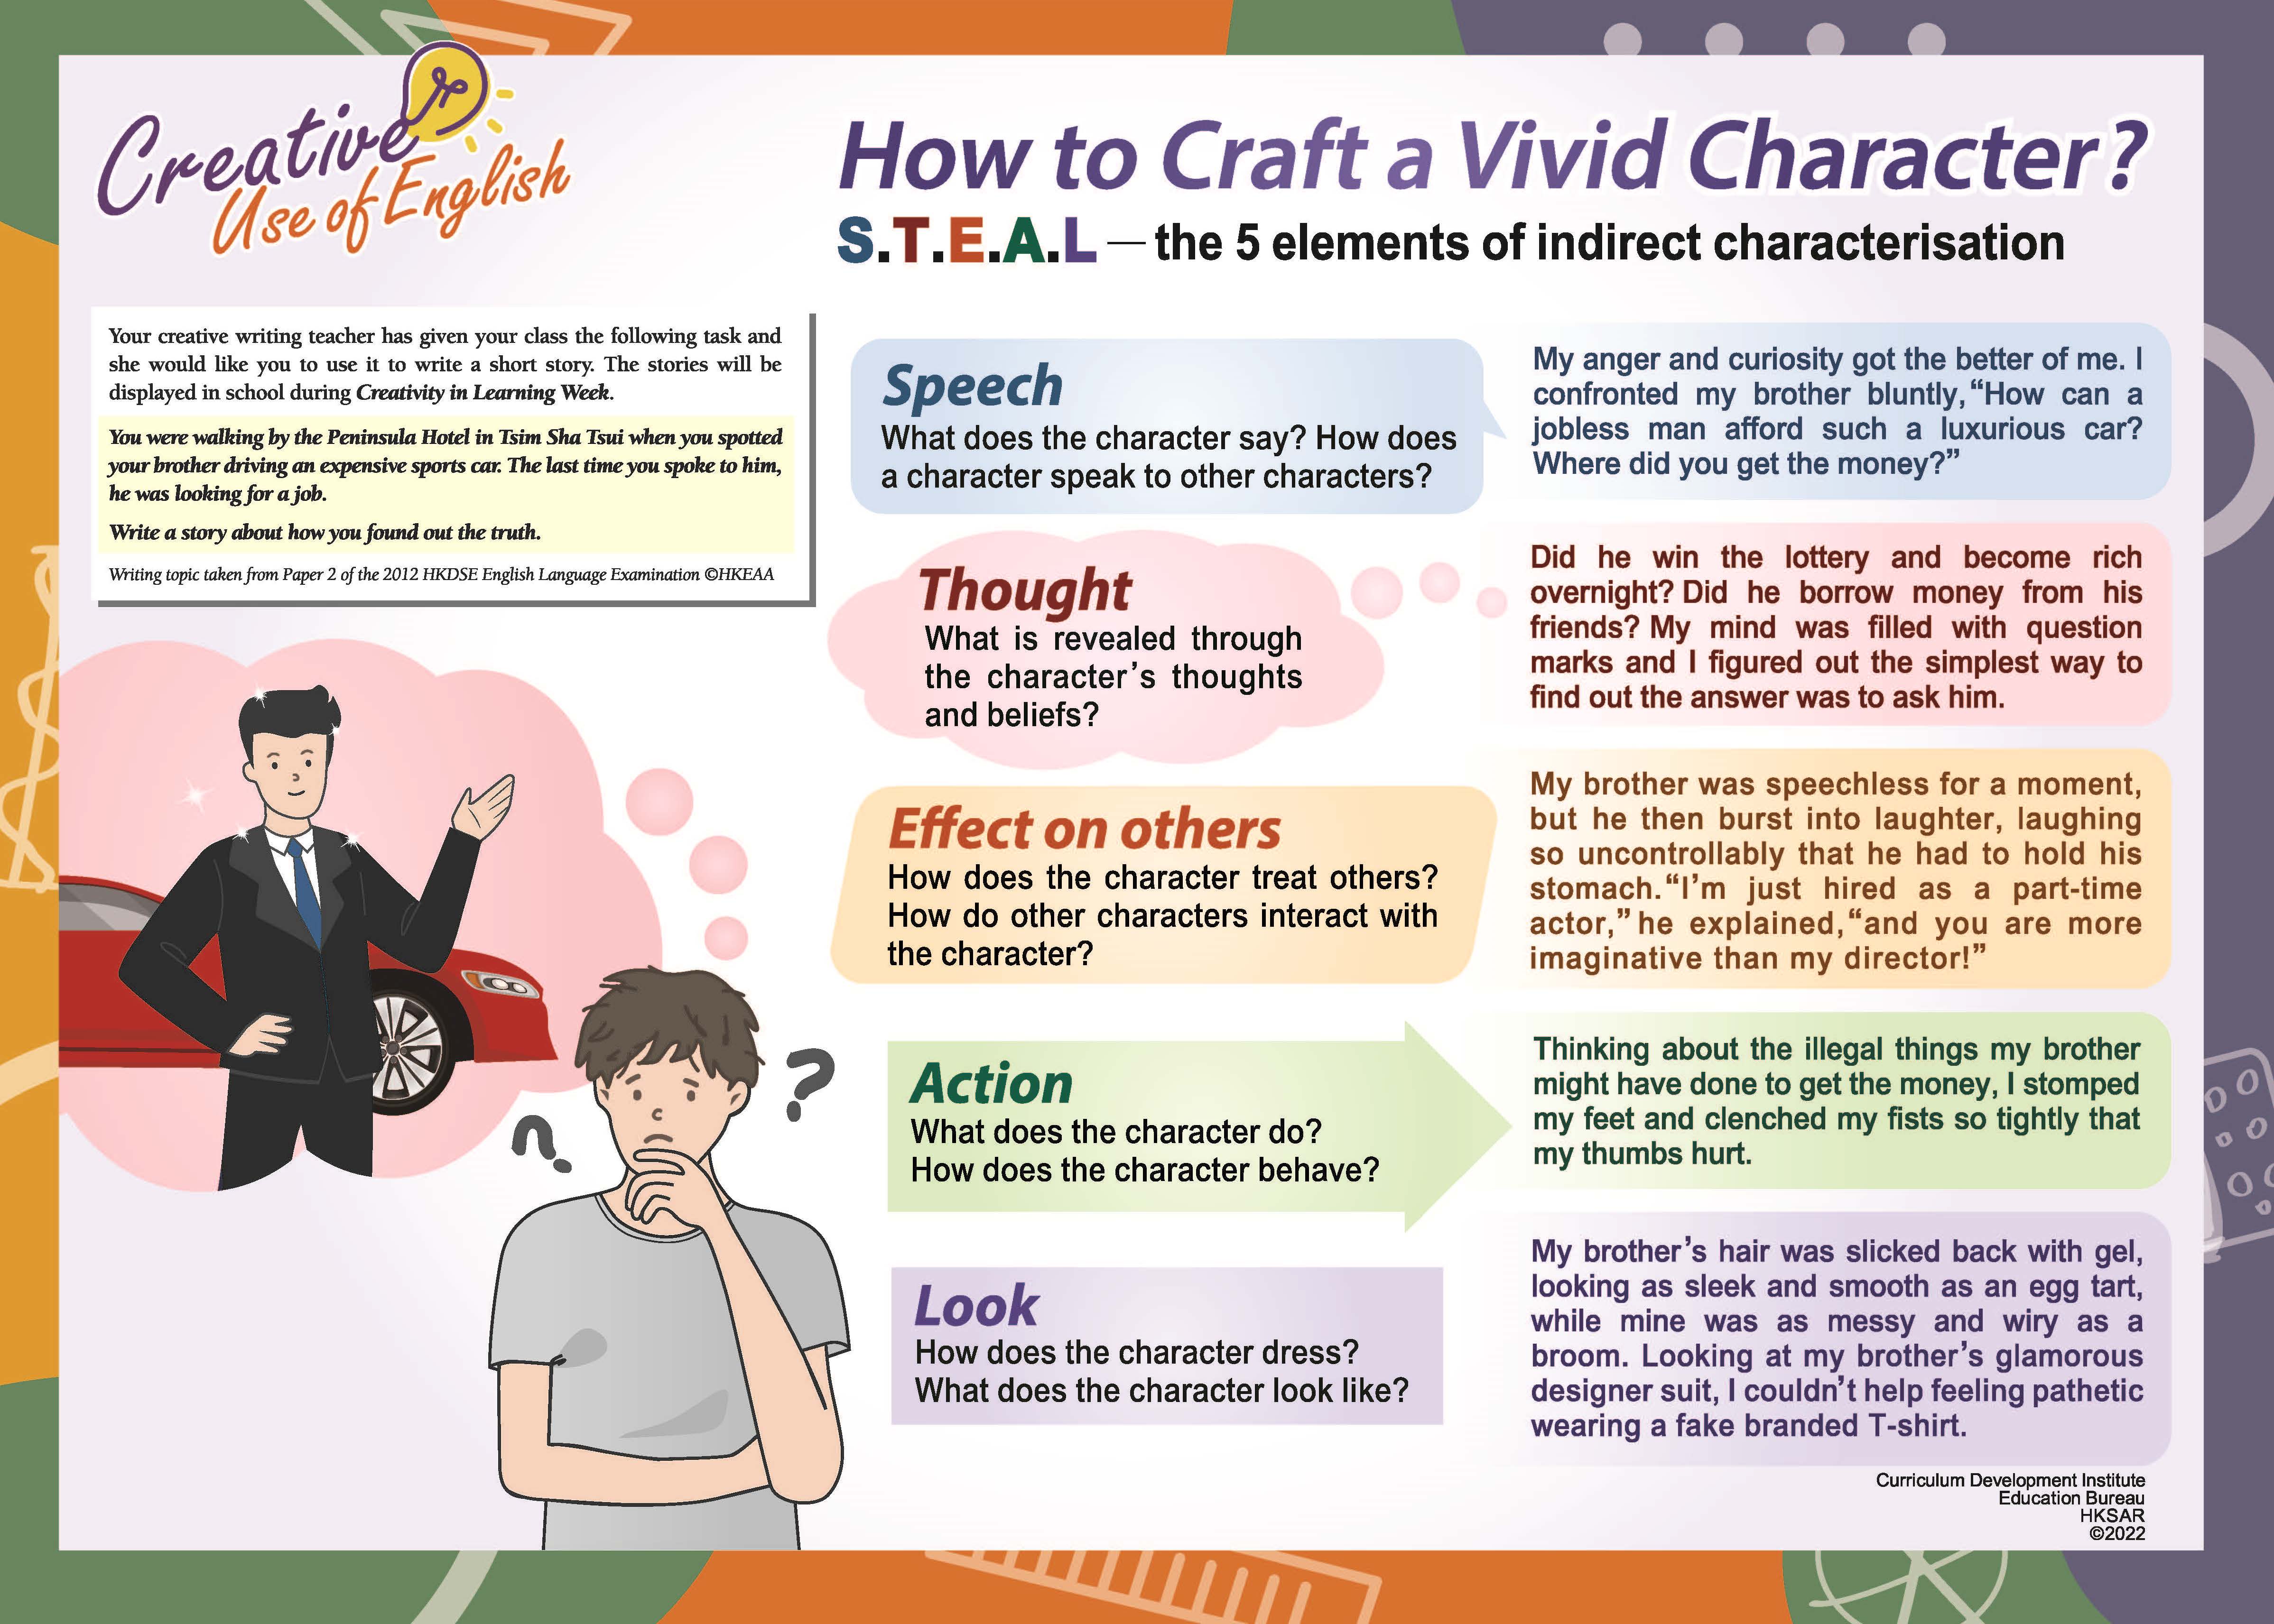 How to Craft a Vivid Character?